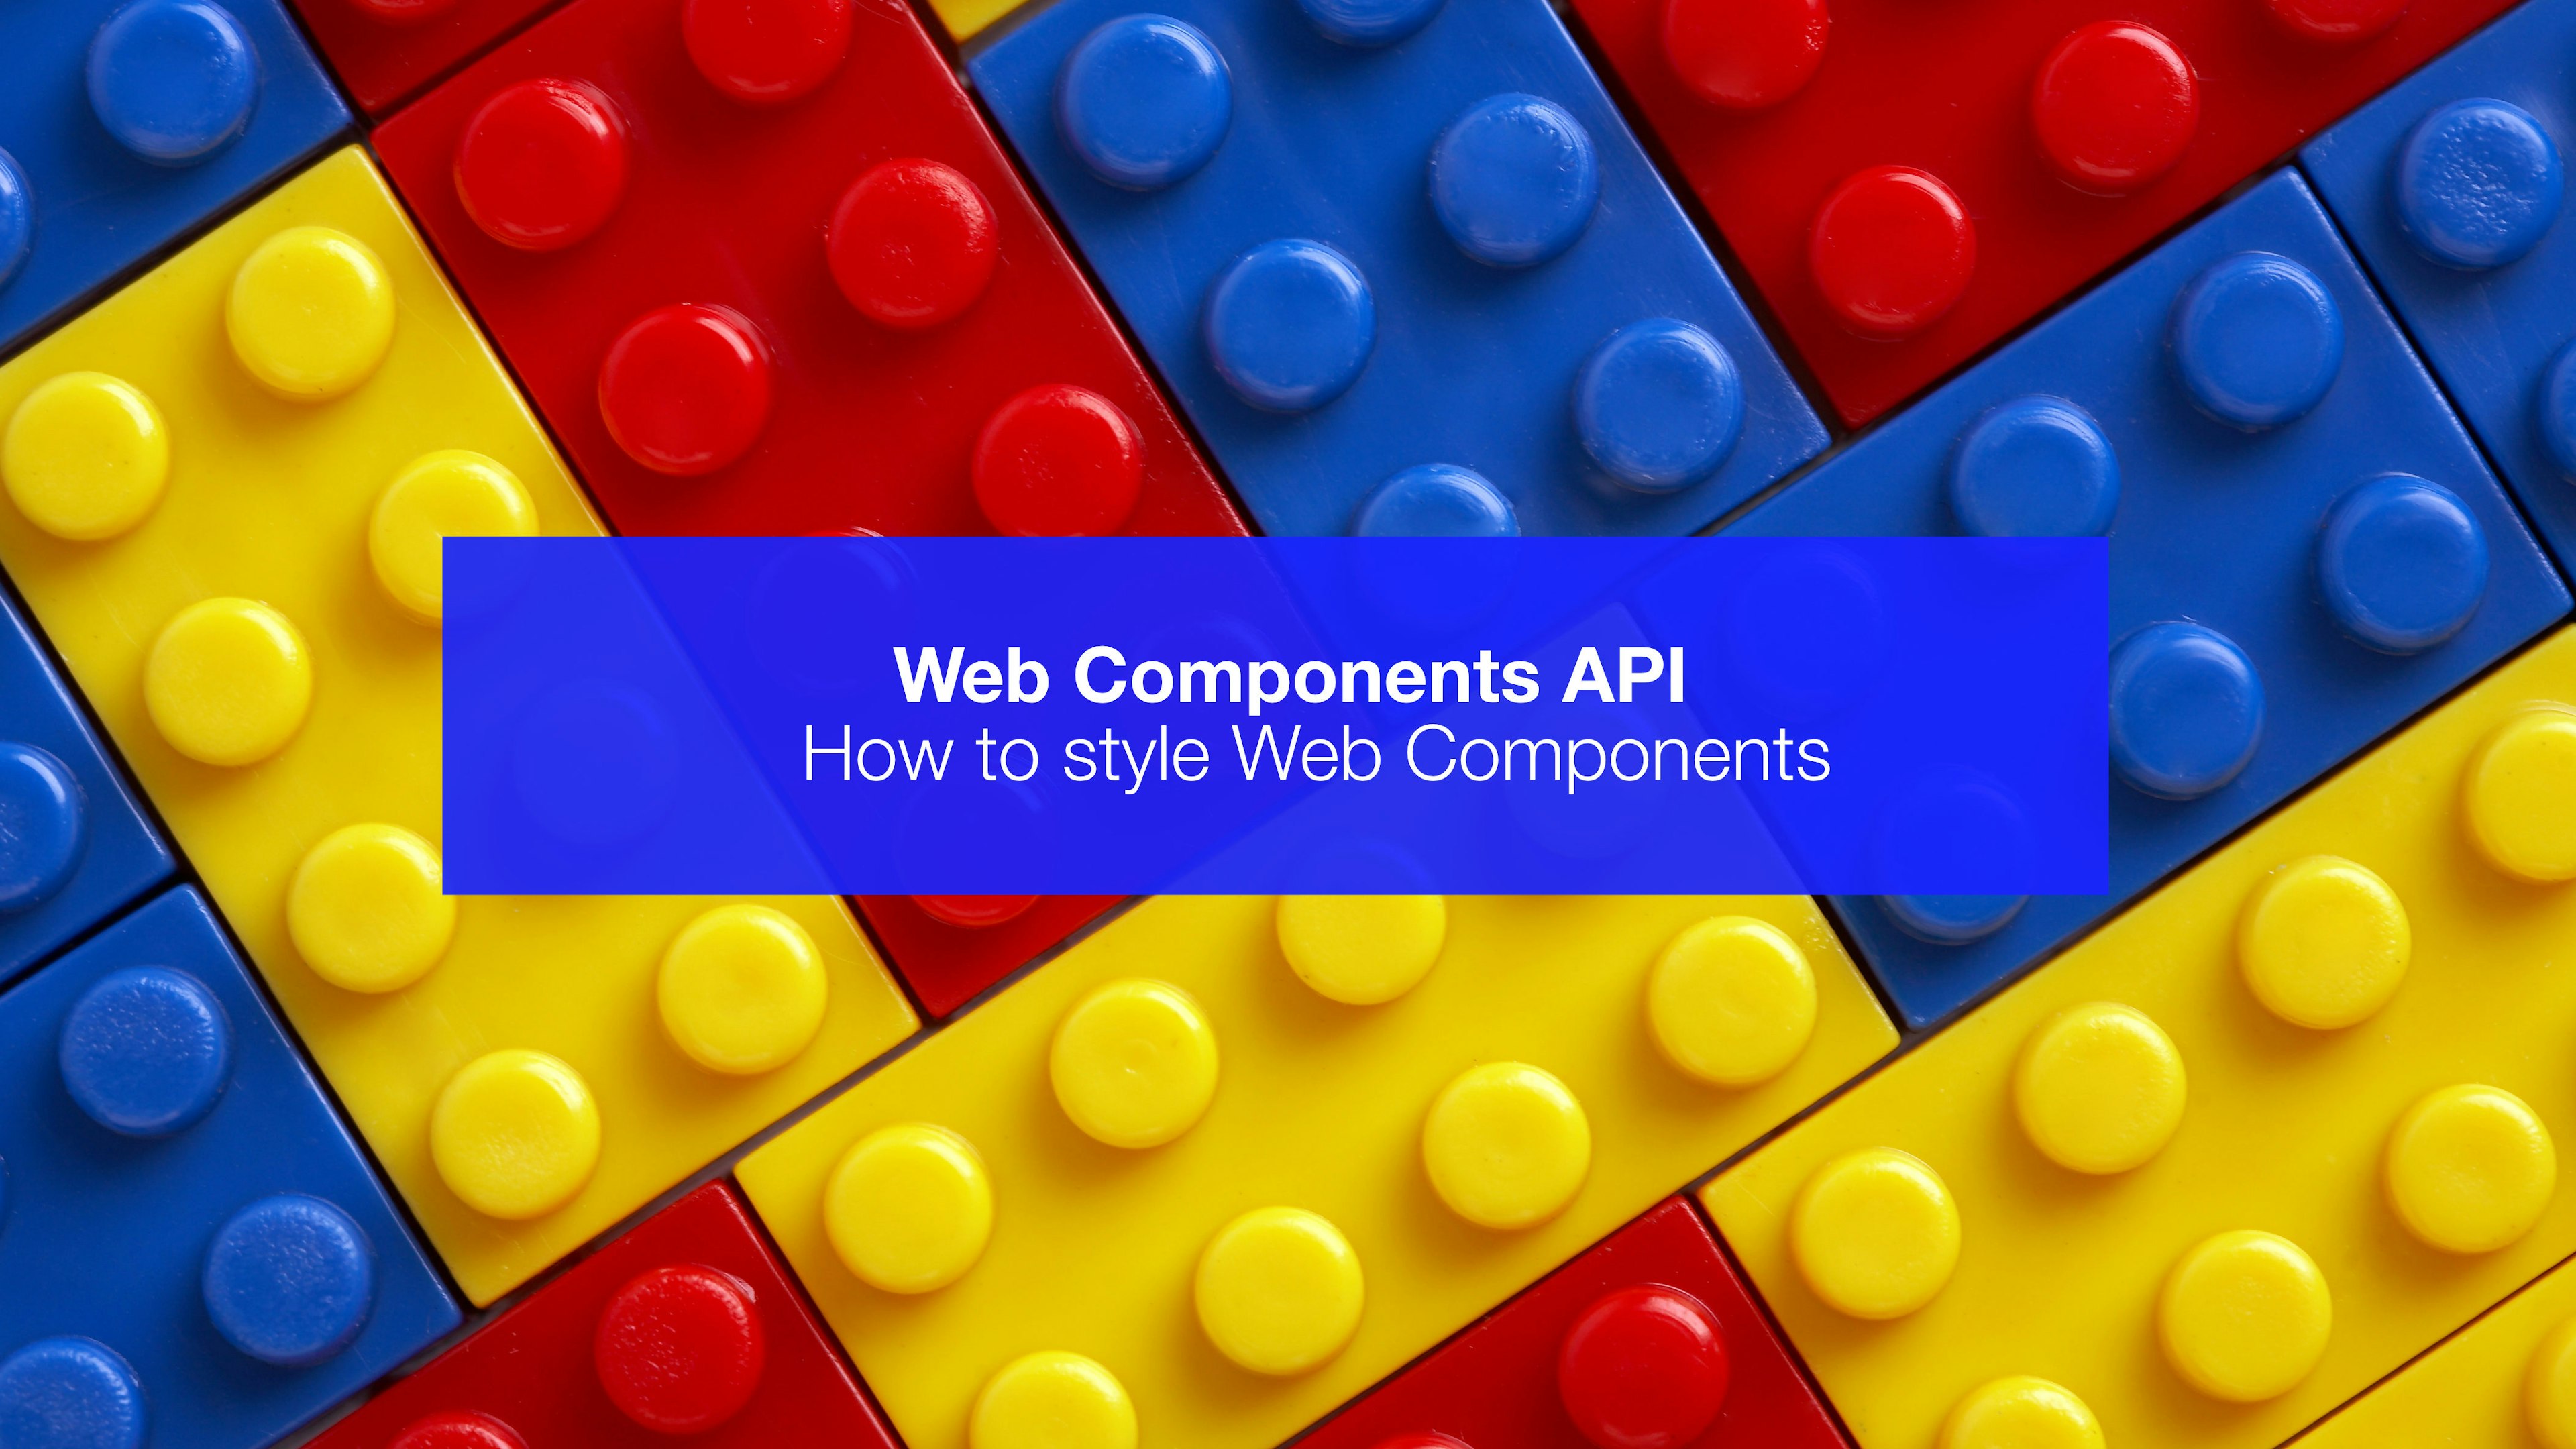 Web Components API: How to Style Web Components